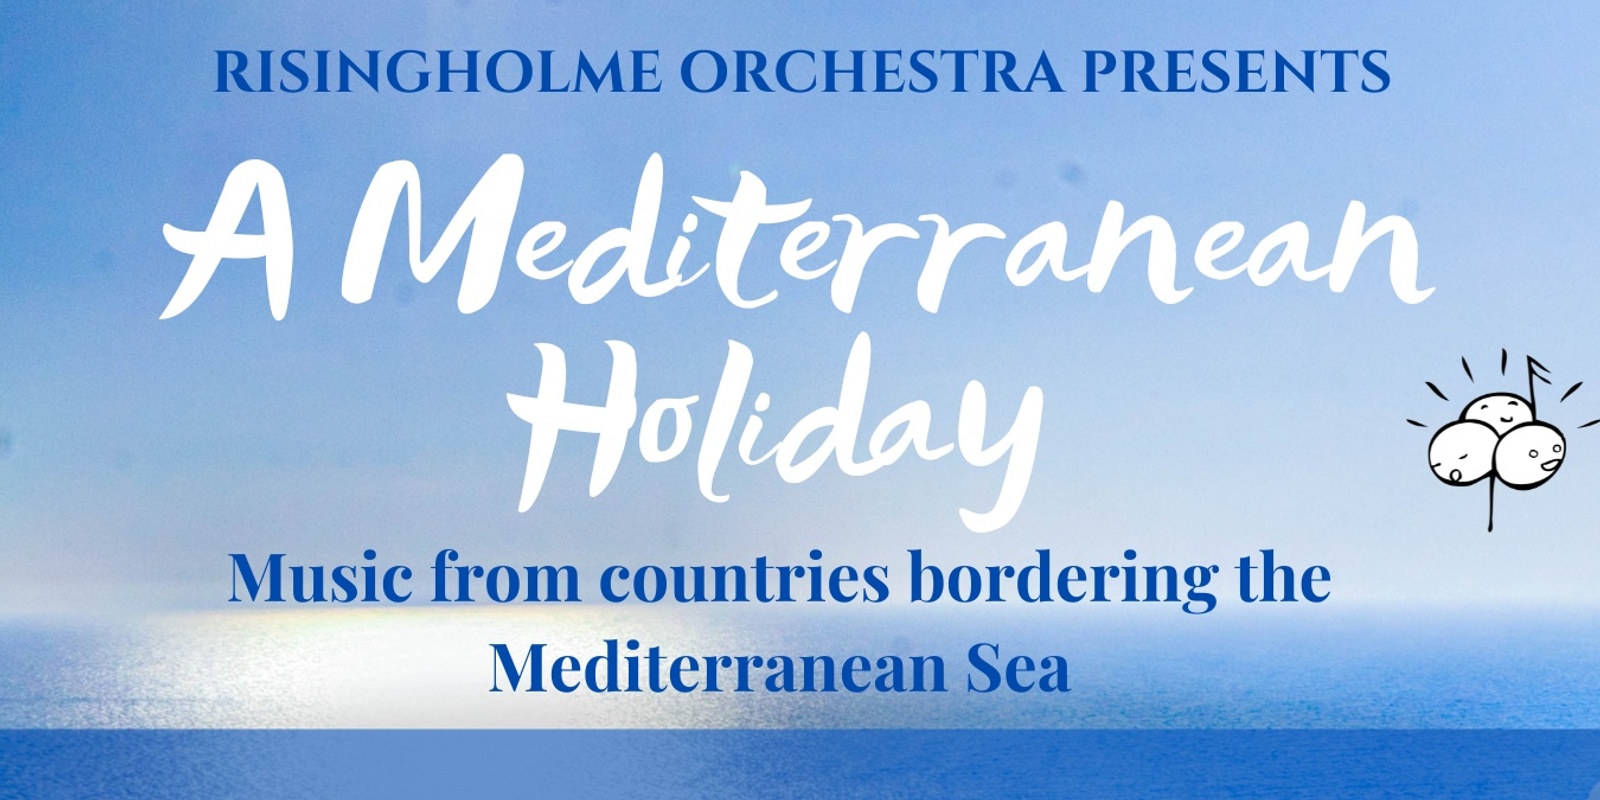 Banner image for Risingholme Orchestra "A Mediterranean Holiday"